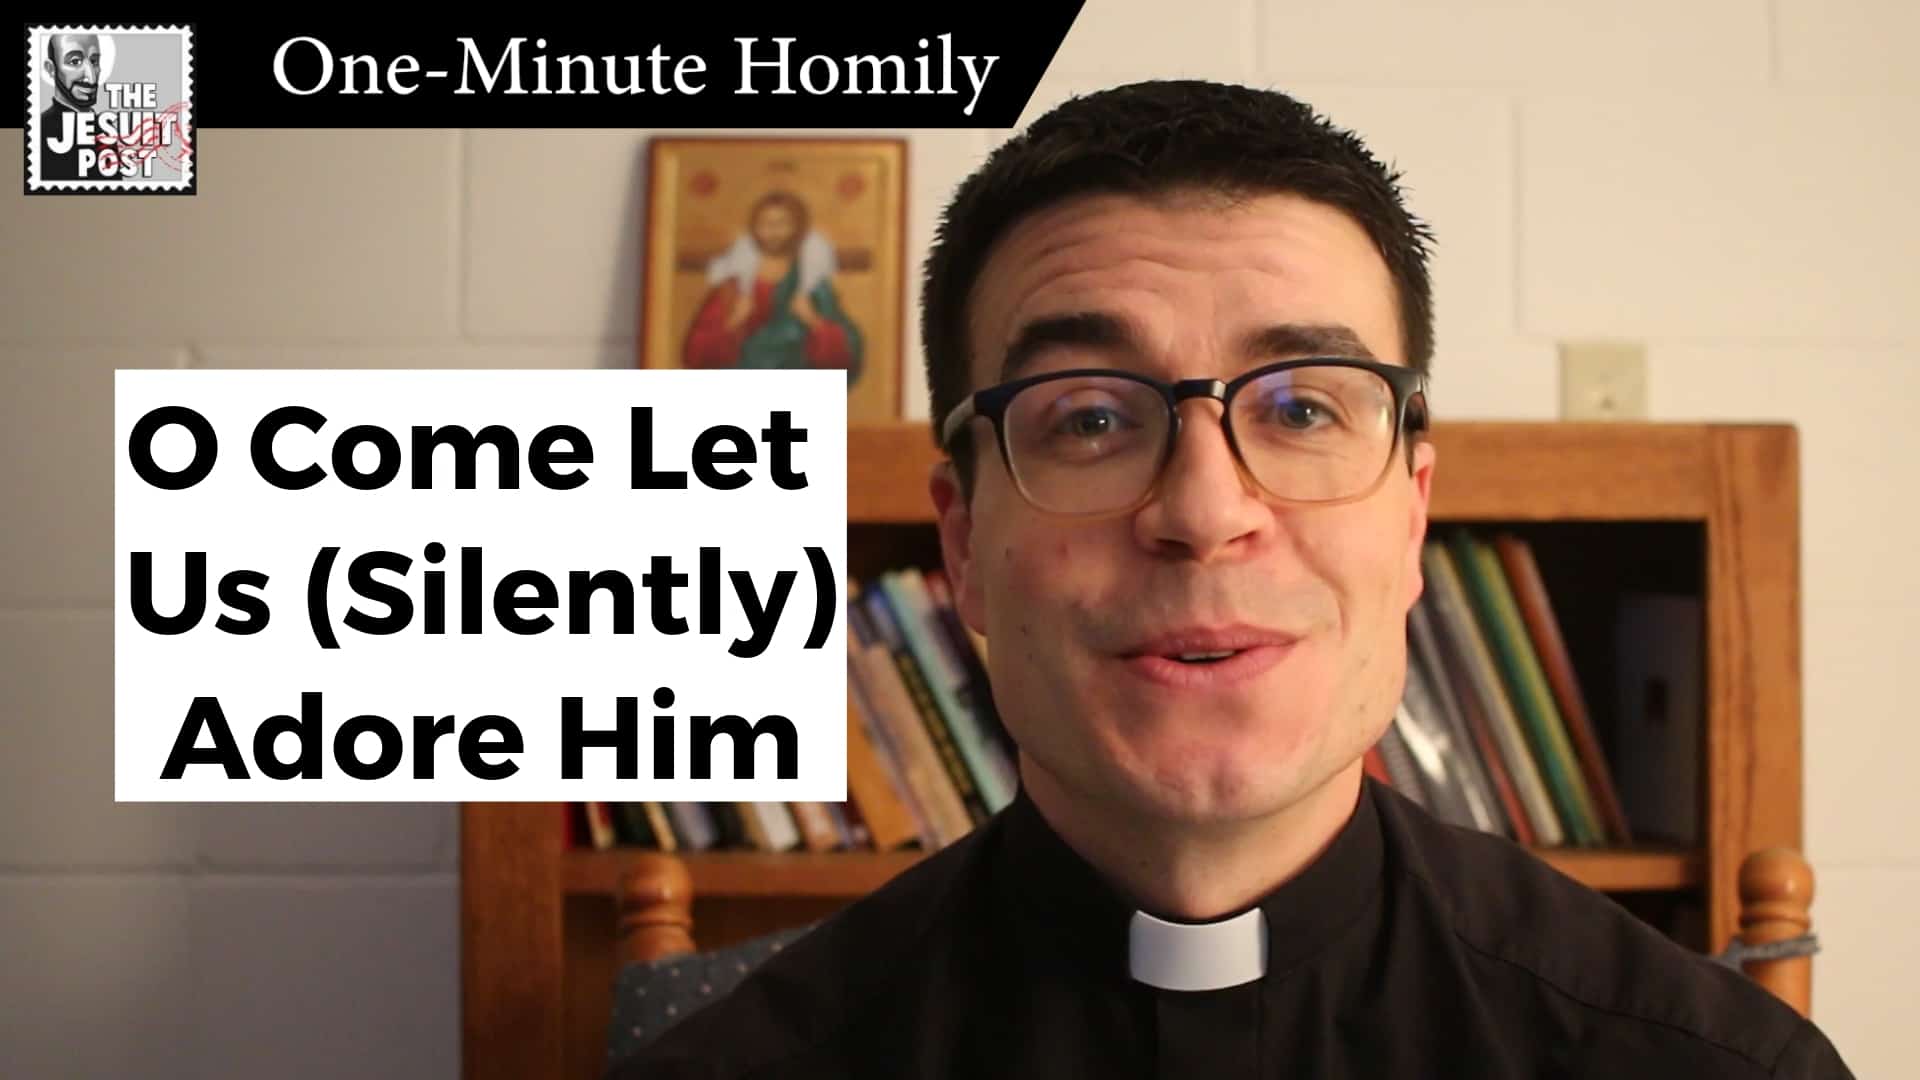 One-Minute Homily: “O Come Let Us (Silently) Adore Him”